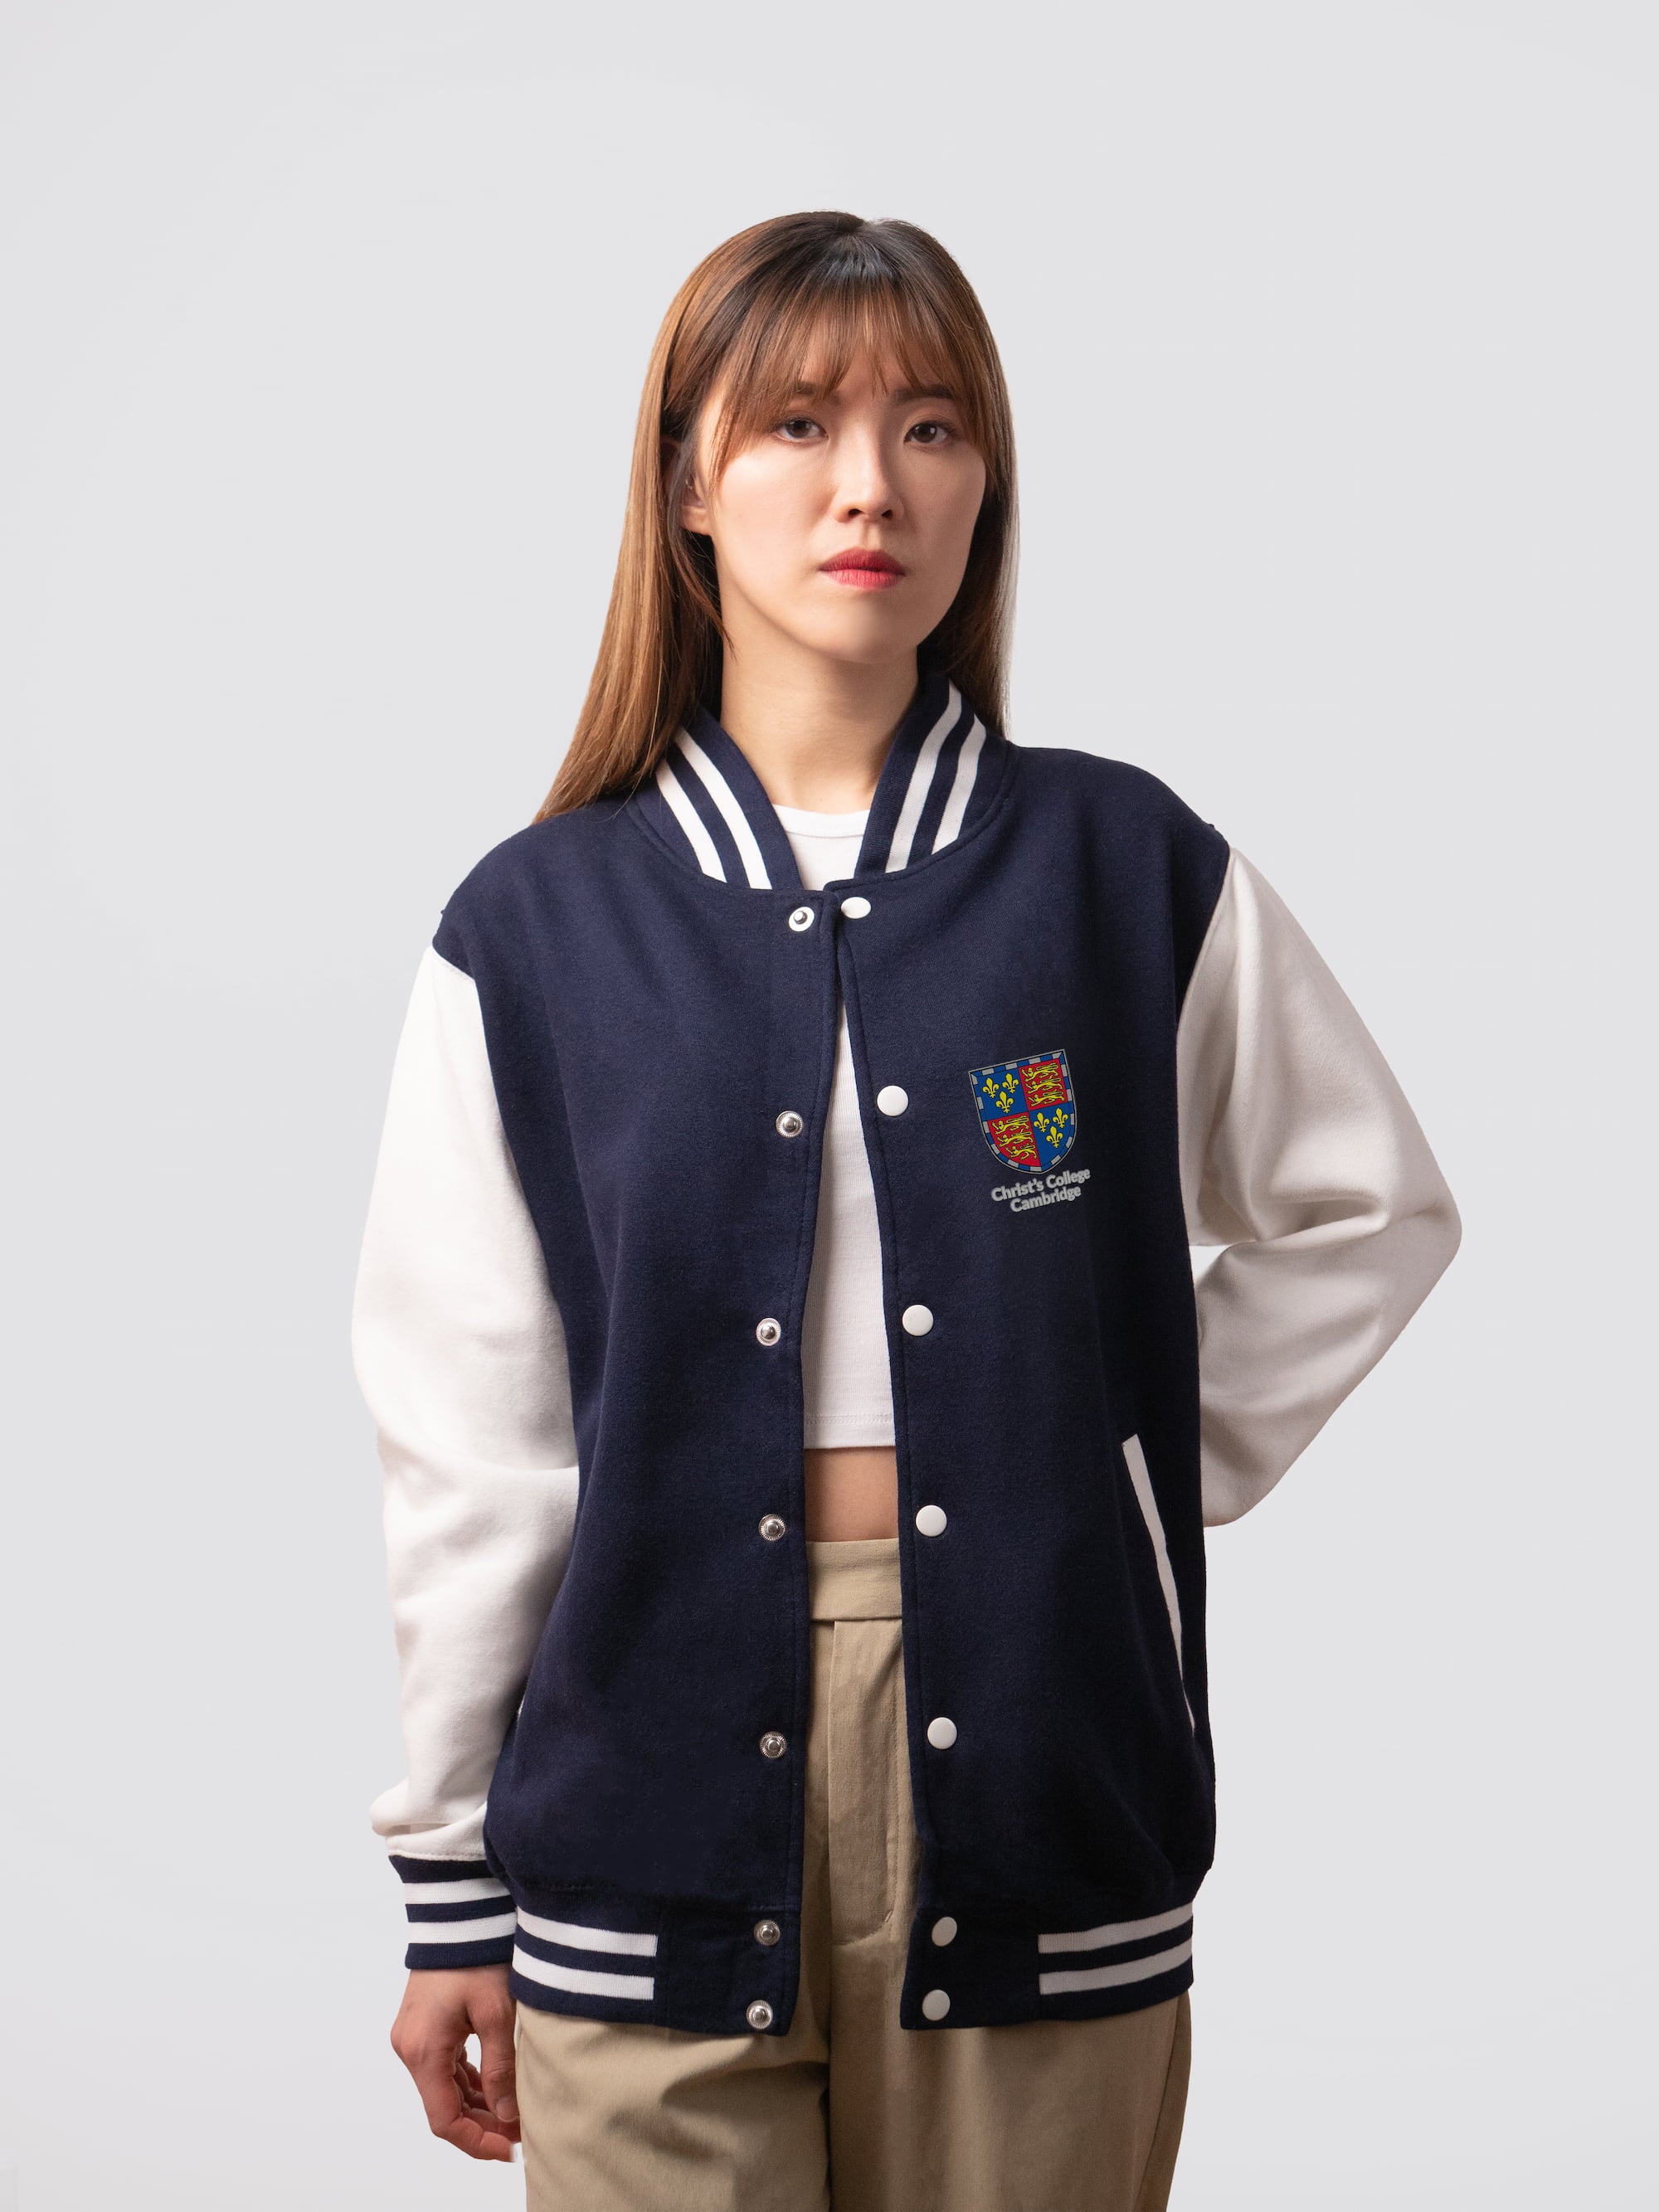 Retro style varsity jacket, with embroidered Christ's crest